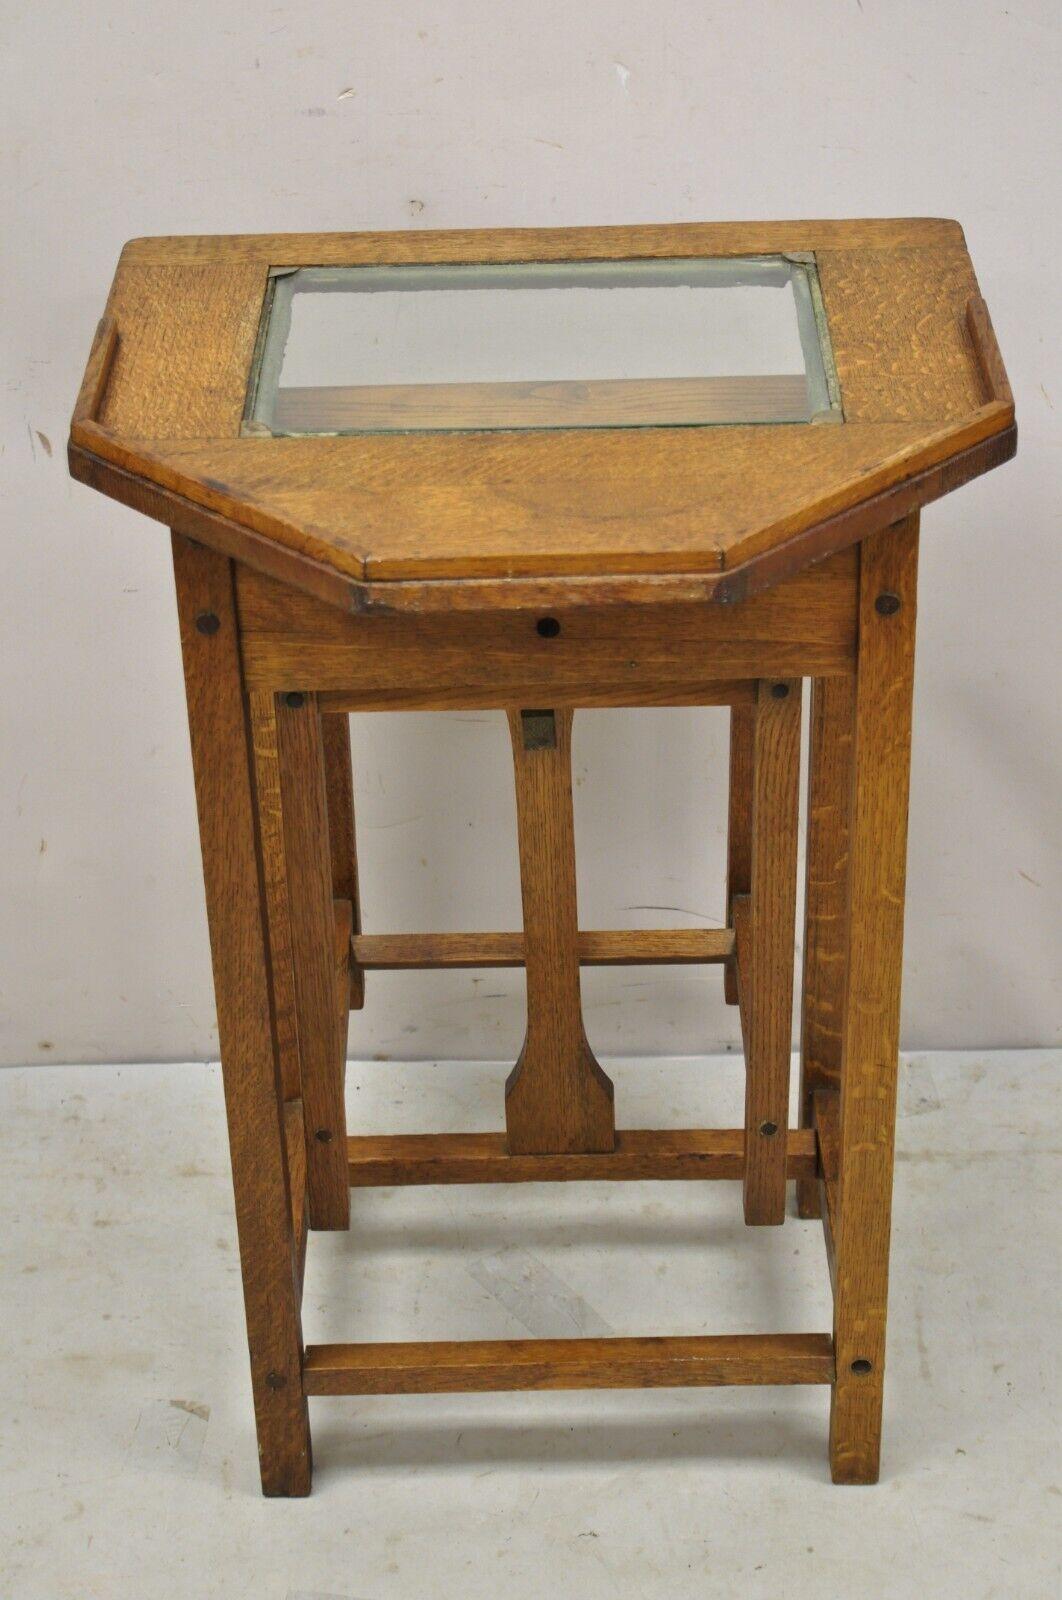 Antique H.T. Cushman Betumal Oak Telephone Stand Small Child's Desk. Item features a pull out seat, glass top, storage cubby to stand, solid woodconstruction, beautiful wood grain, original label, quality American craftsmanship. circa 1900s.